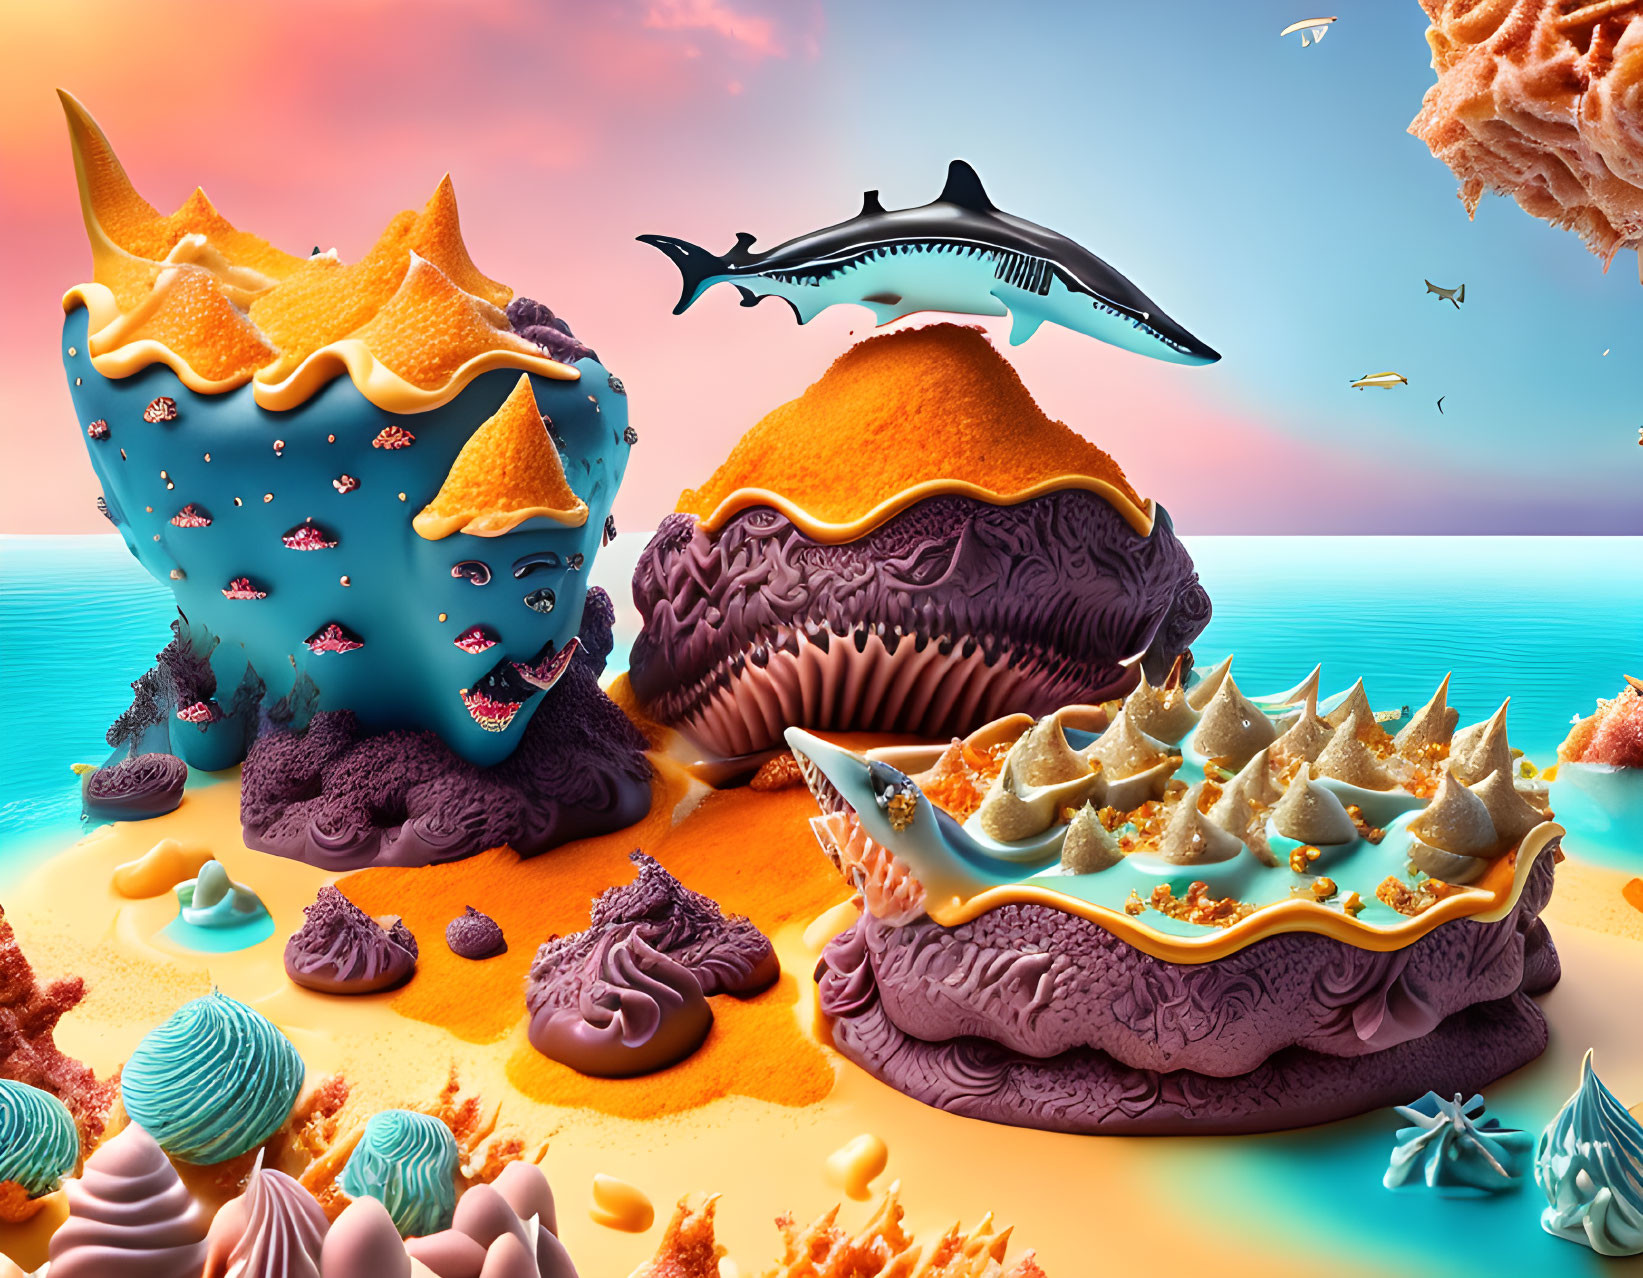 Colorful Stylized Marine Life in Surreal Coral Landscape